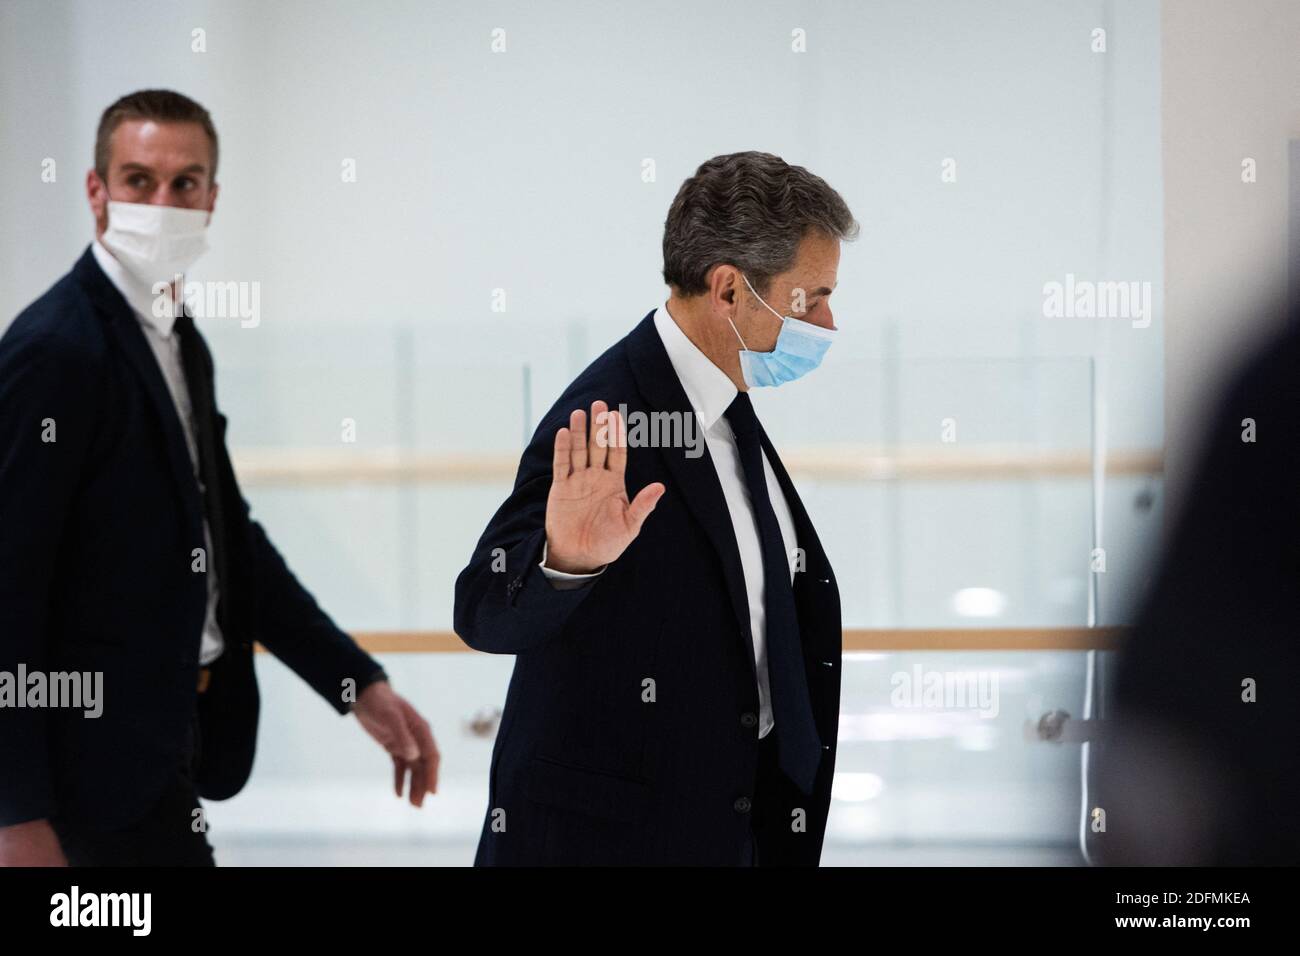 Former French president Nicolas Sarkozy waves as he leaves the court room during a break of his trial for attempted bribery of a judge, in Paris on November 23, 2020. Sarkozy, 65, a rightwing politician who led France between 2007 and 2012, has repeatedly denied the accusations of corruption and influence peddling for allegedly trying to bribe a judge for information in a case known as the 'bugging affair'. The prosecution alleges Sarkozy and his lawyer, Thierry Herzog, attempted to bribe a senior magistrate, Gilbert Azibert, 74, to hand over secret information from a separate investigation ag Stock Photo